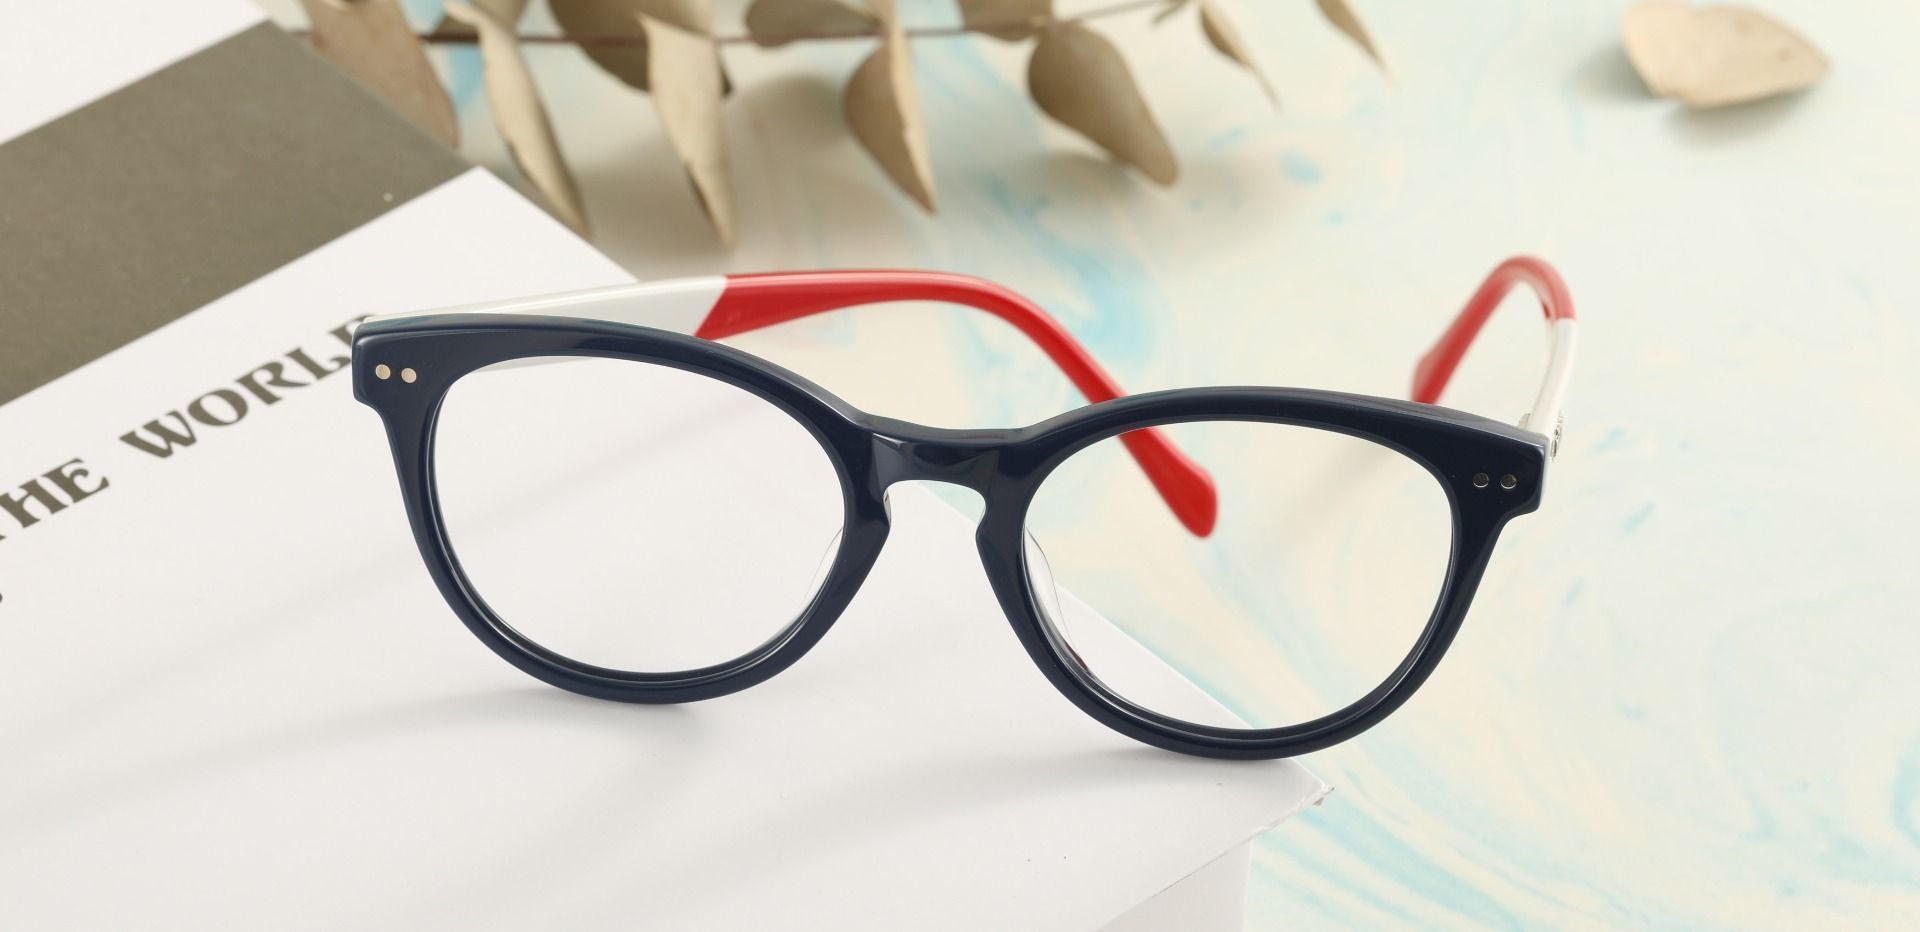 Revere Oval Prescription Glasses - The Frame Is Blue And Red